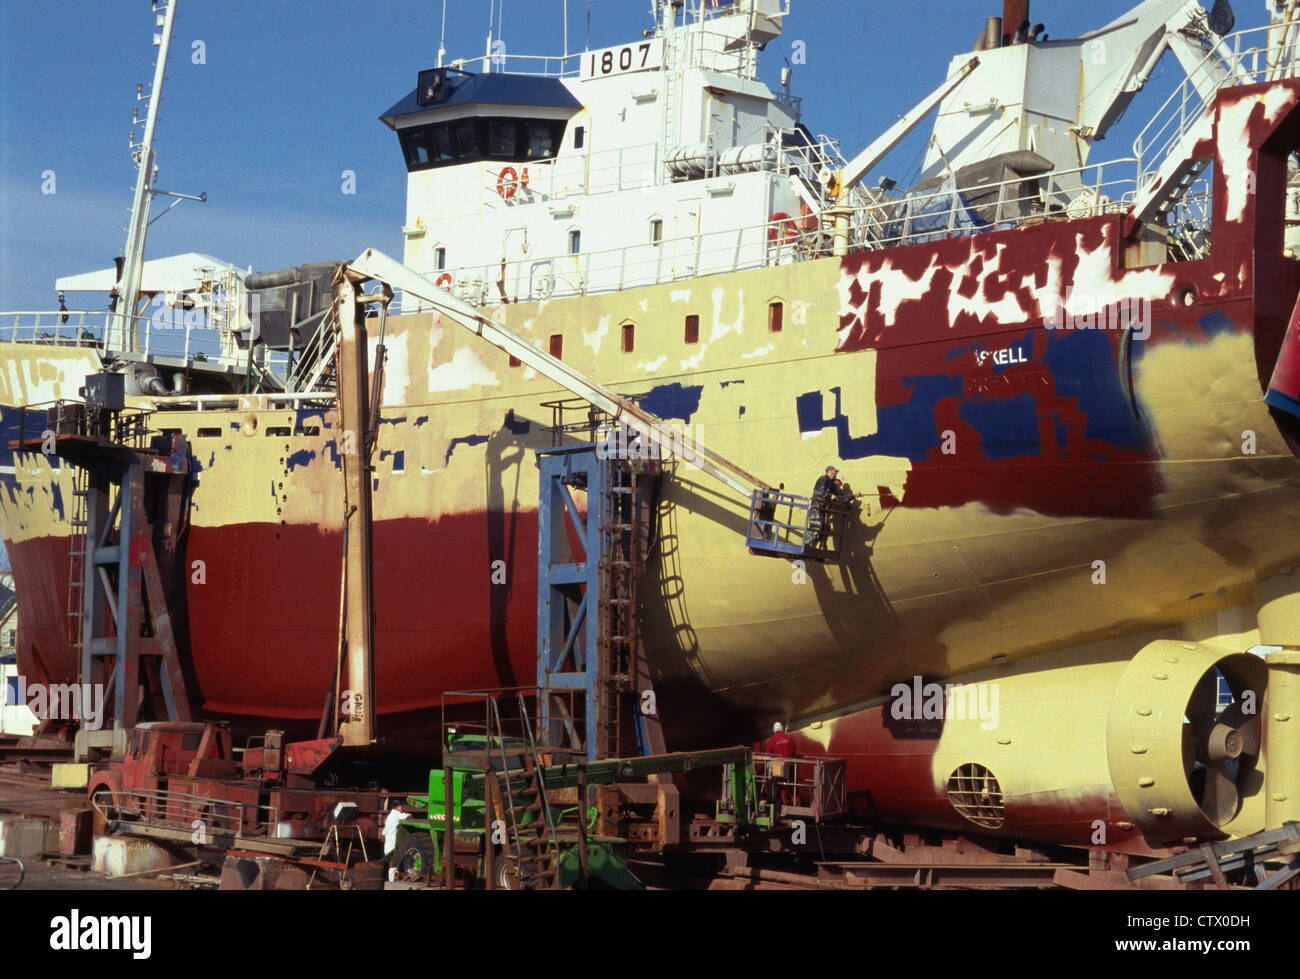 A dry docked ship in Iceland being painted. Stock Photo